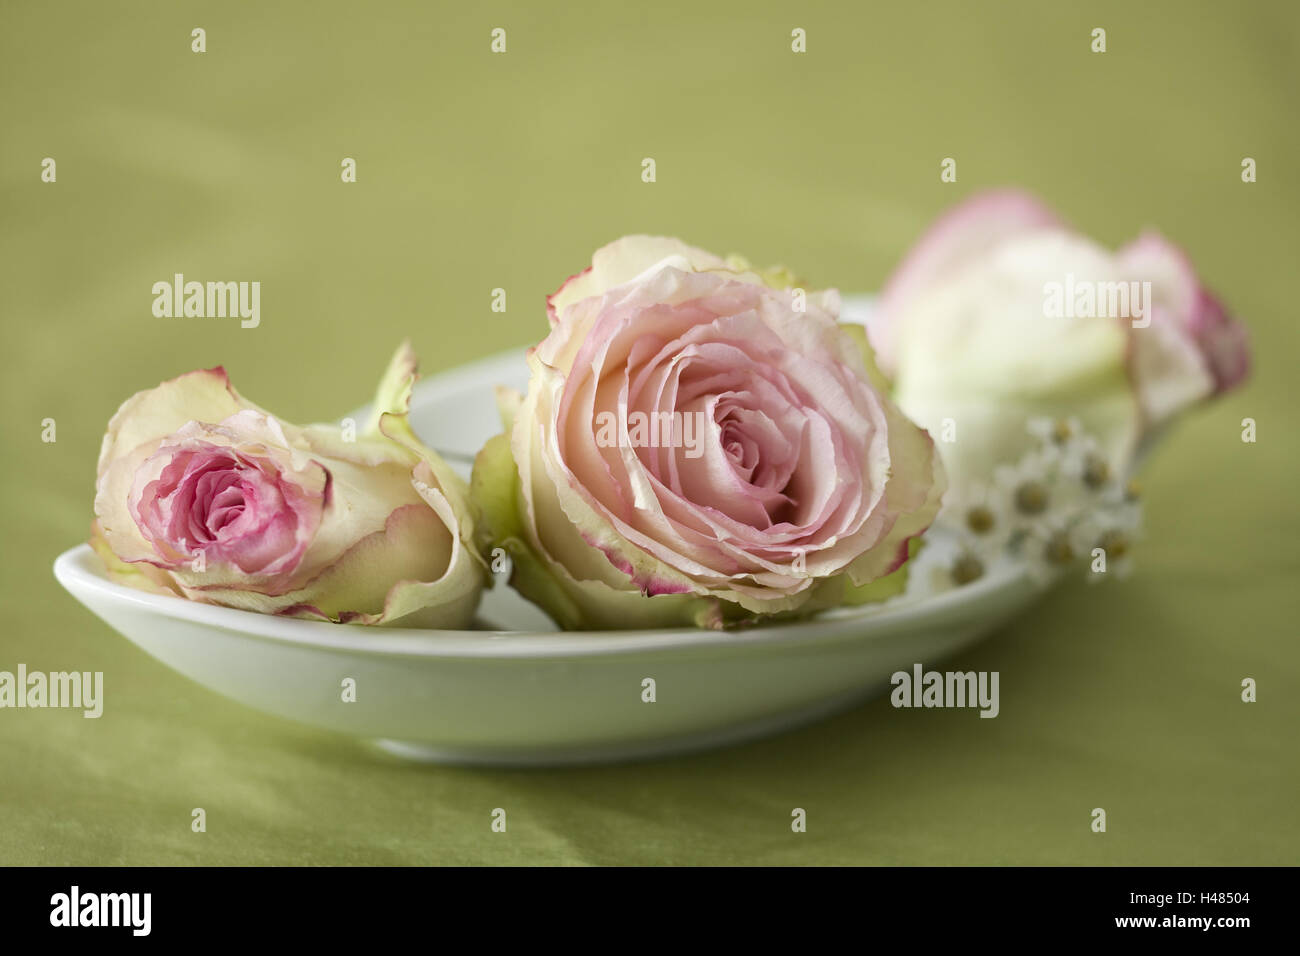 Pink roses in white porcelain peel on moss-green ceiling, Stock Photo